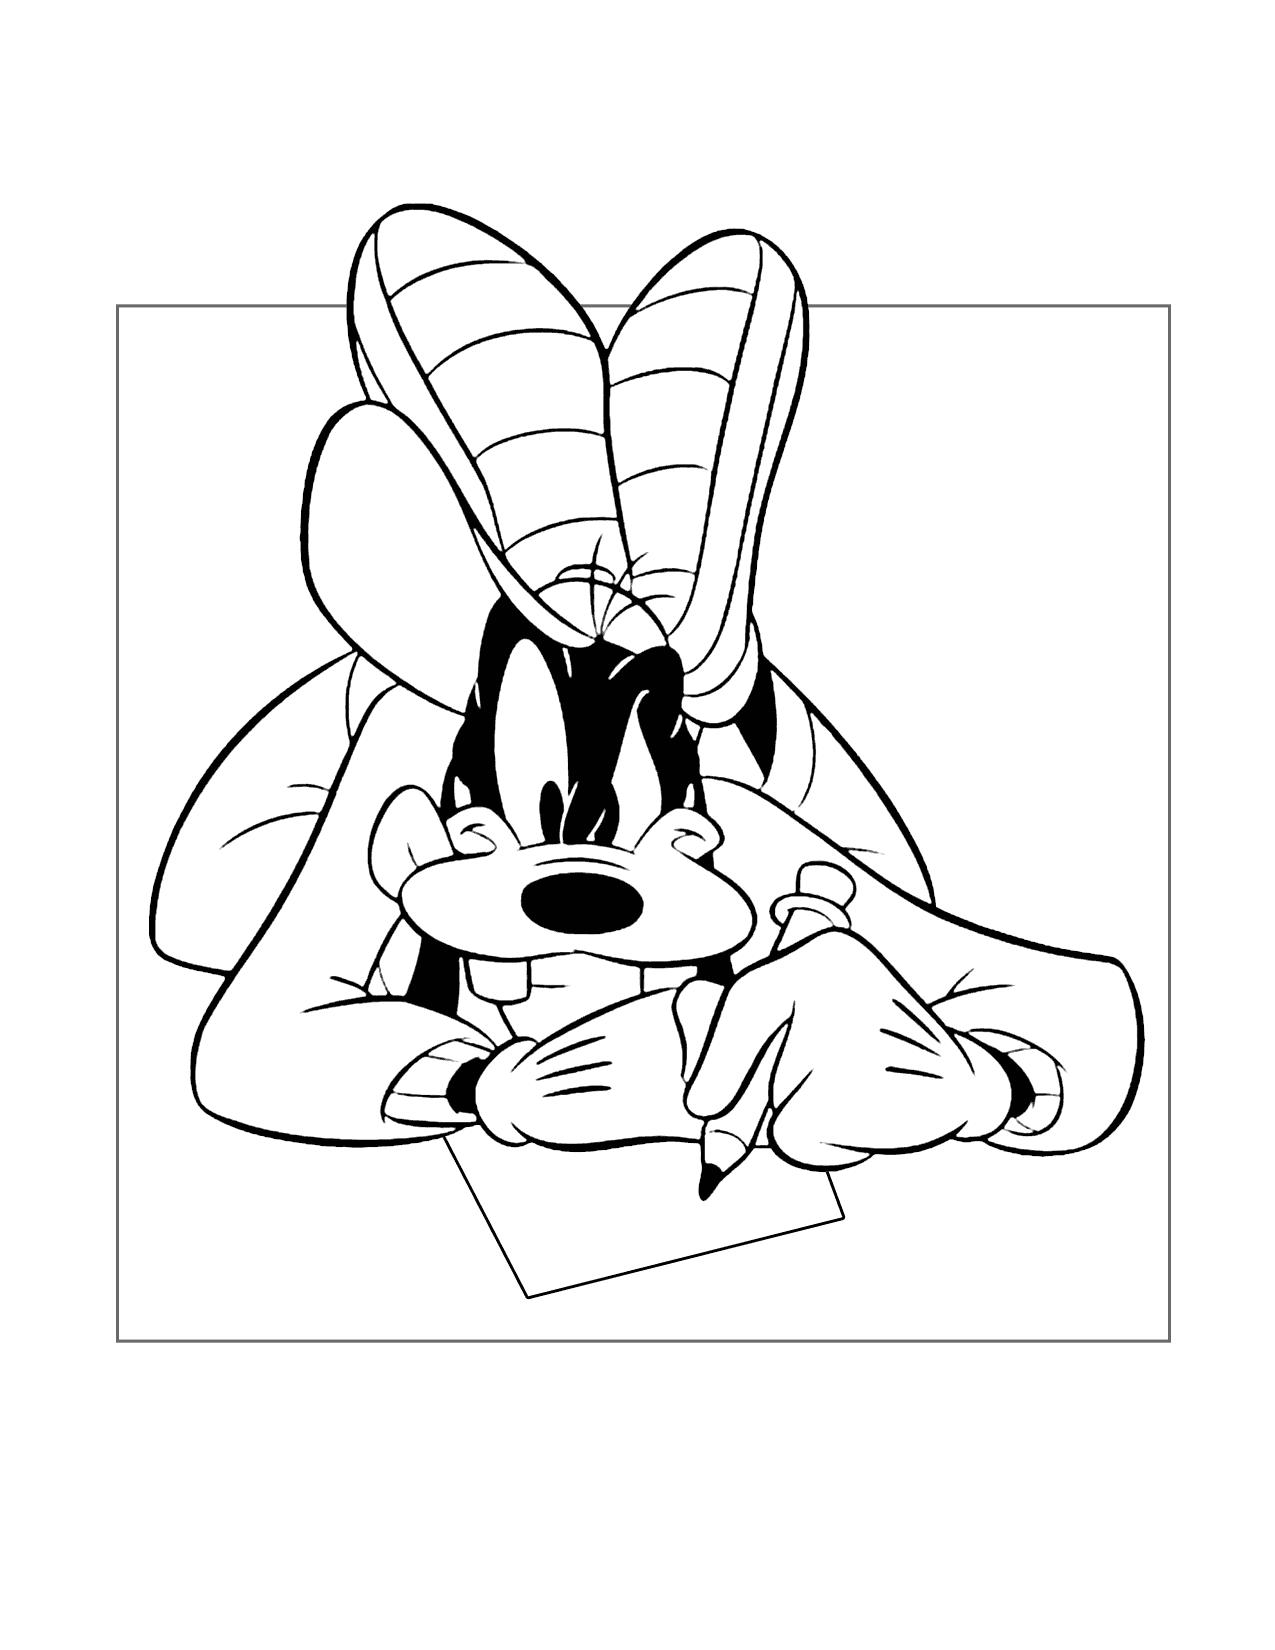 Goofy Writes A Letter Coloring Page